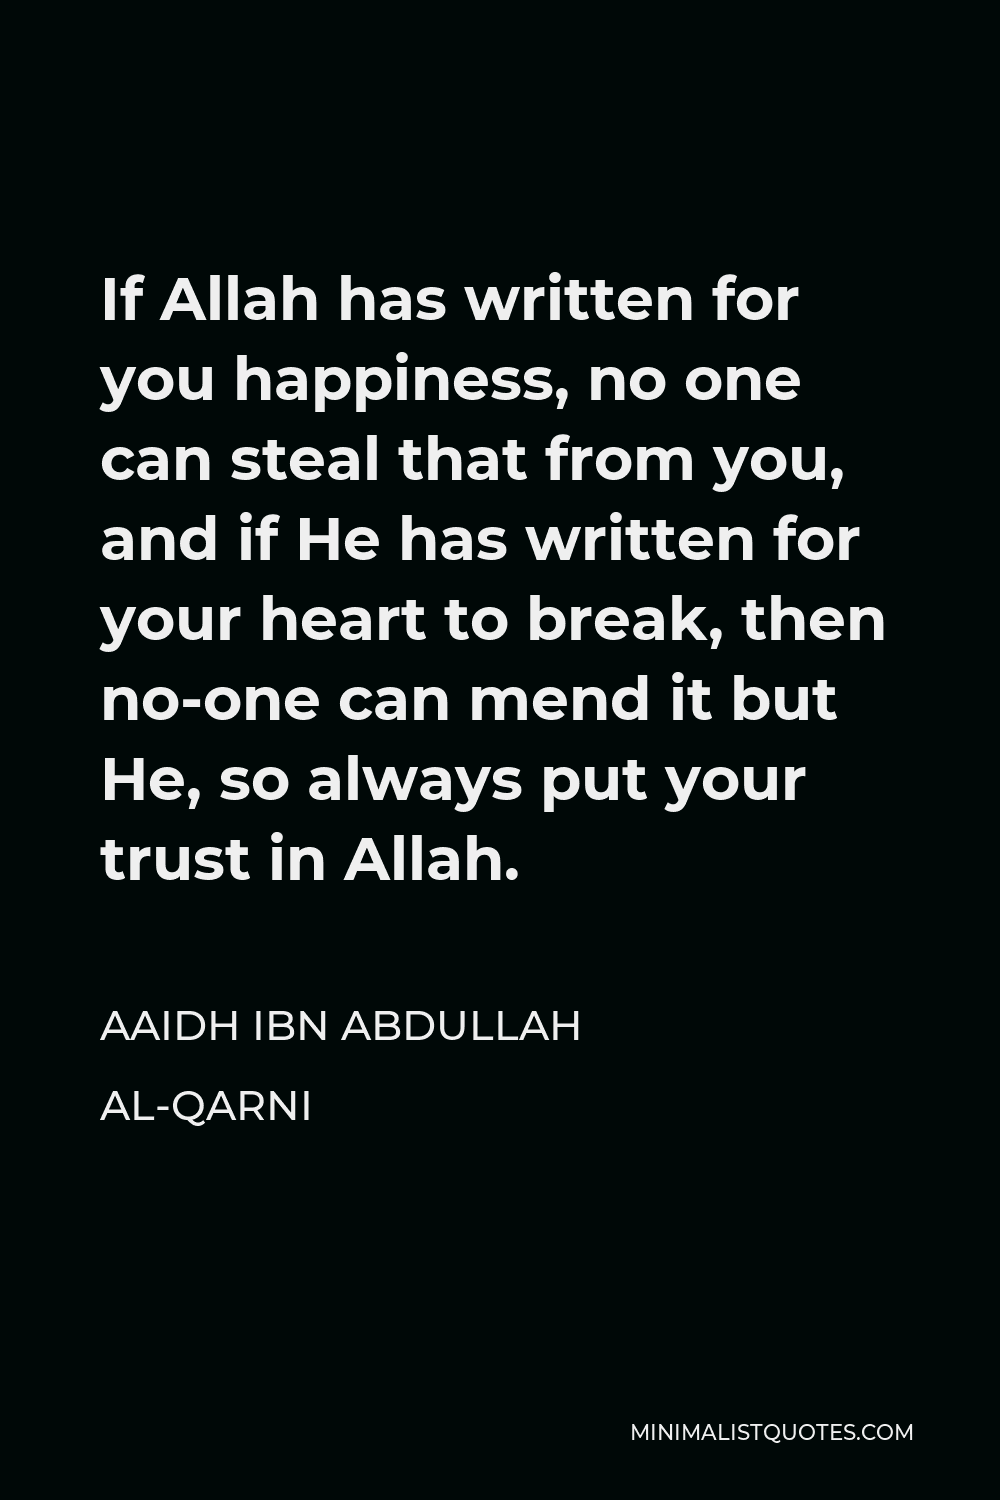 Aaidh ibn Abdullah al-Qarni Quote - If Allah has written for you happiness, no one can steal that from you, and if He has written for your heart to break, then no-one can mend it but He, so always put your trust in Allah.